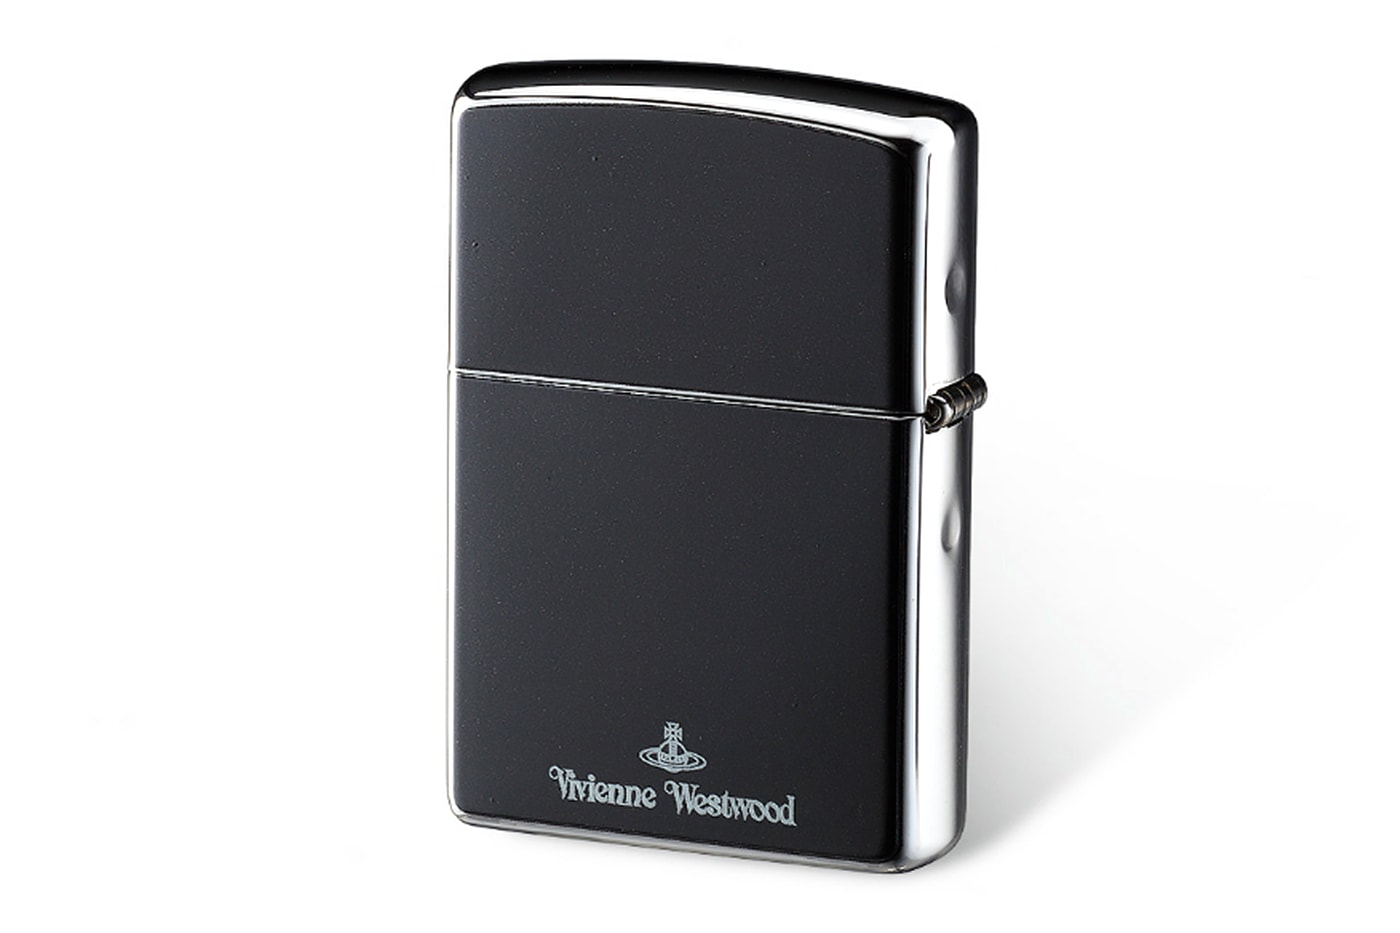 Vivienne Westwood x ZIPPO Lighter Collection | Hypebeast